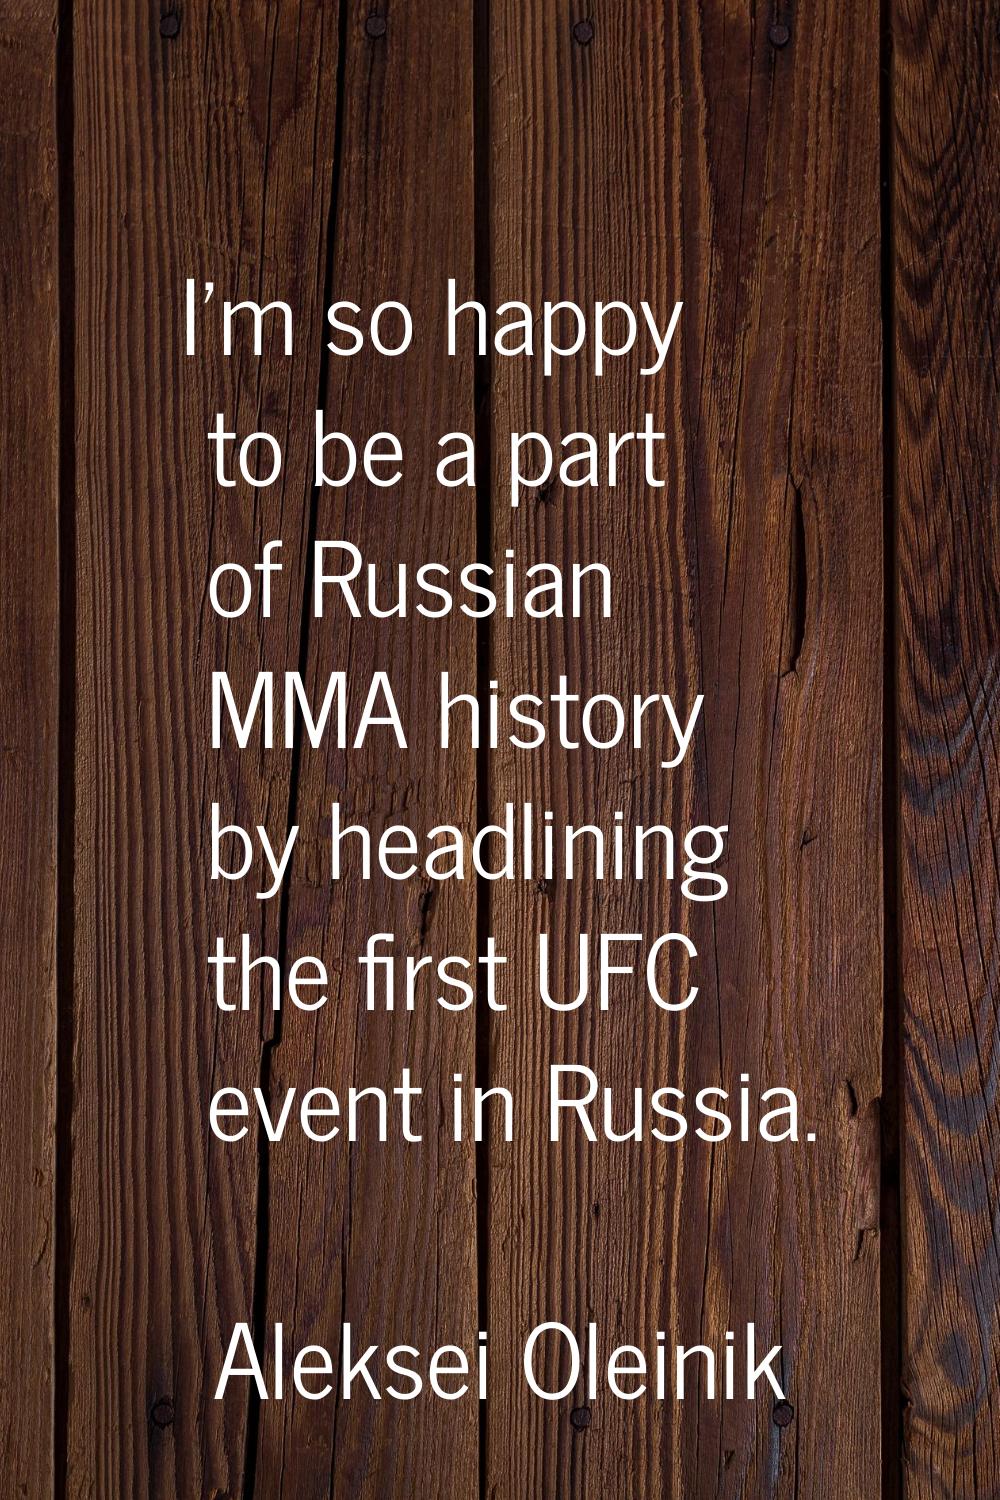 I'm so happy to be a part of Russian MMA history by headlining the first UFC event in Russia.